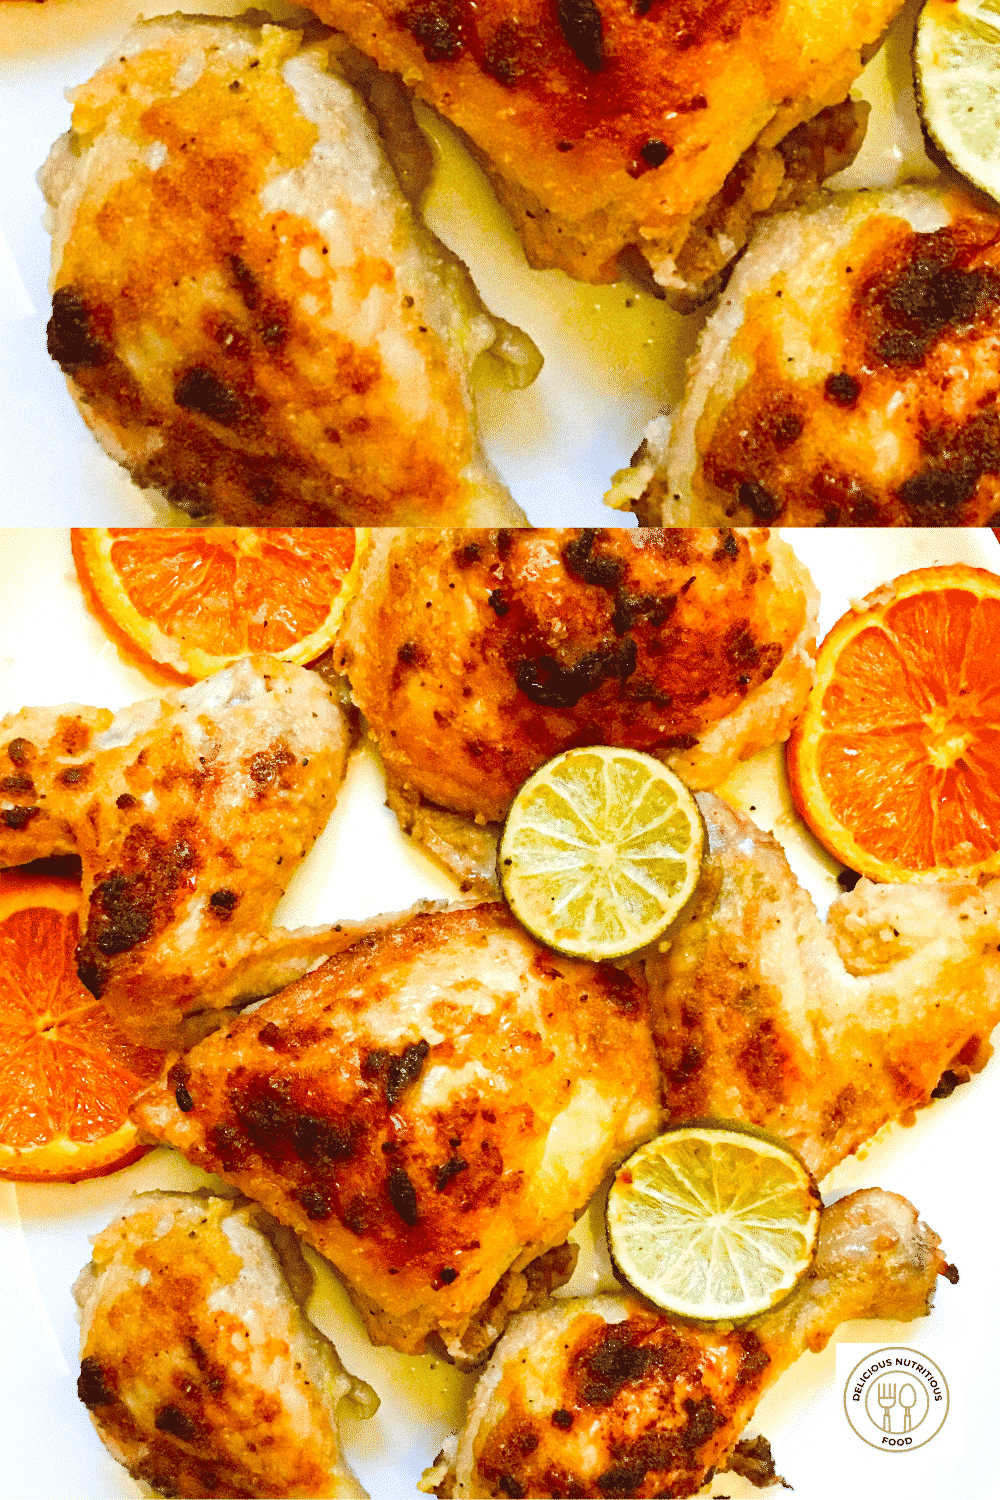 Whole chicken cut in 8 pieces. sweet and sour chicken marinated in lime and orange juice baked on a sheet pan ready to serve. Two pictures fused.